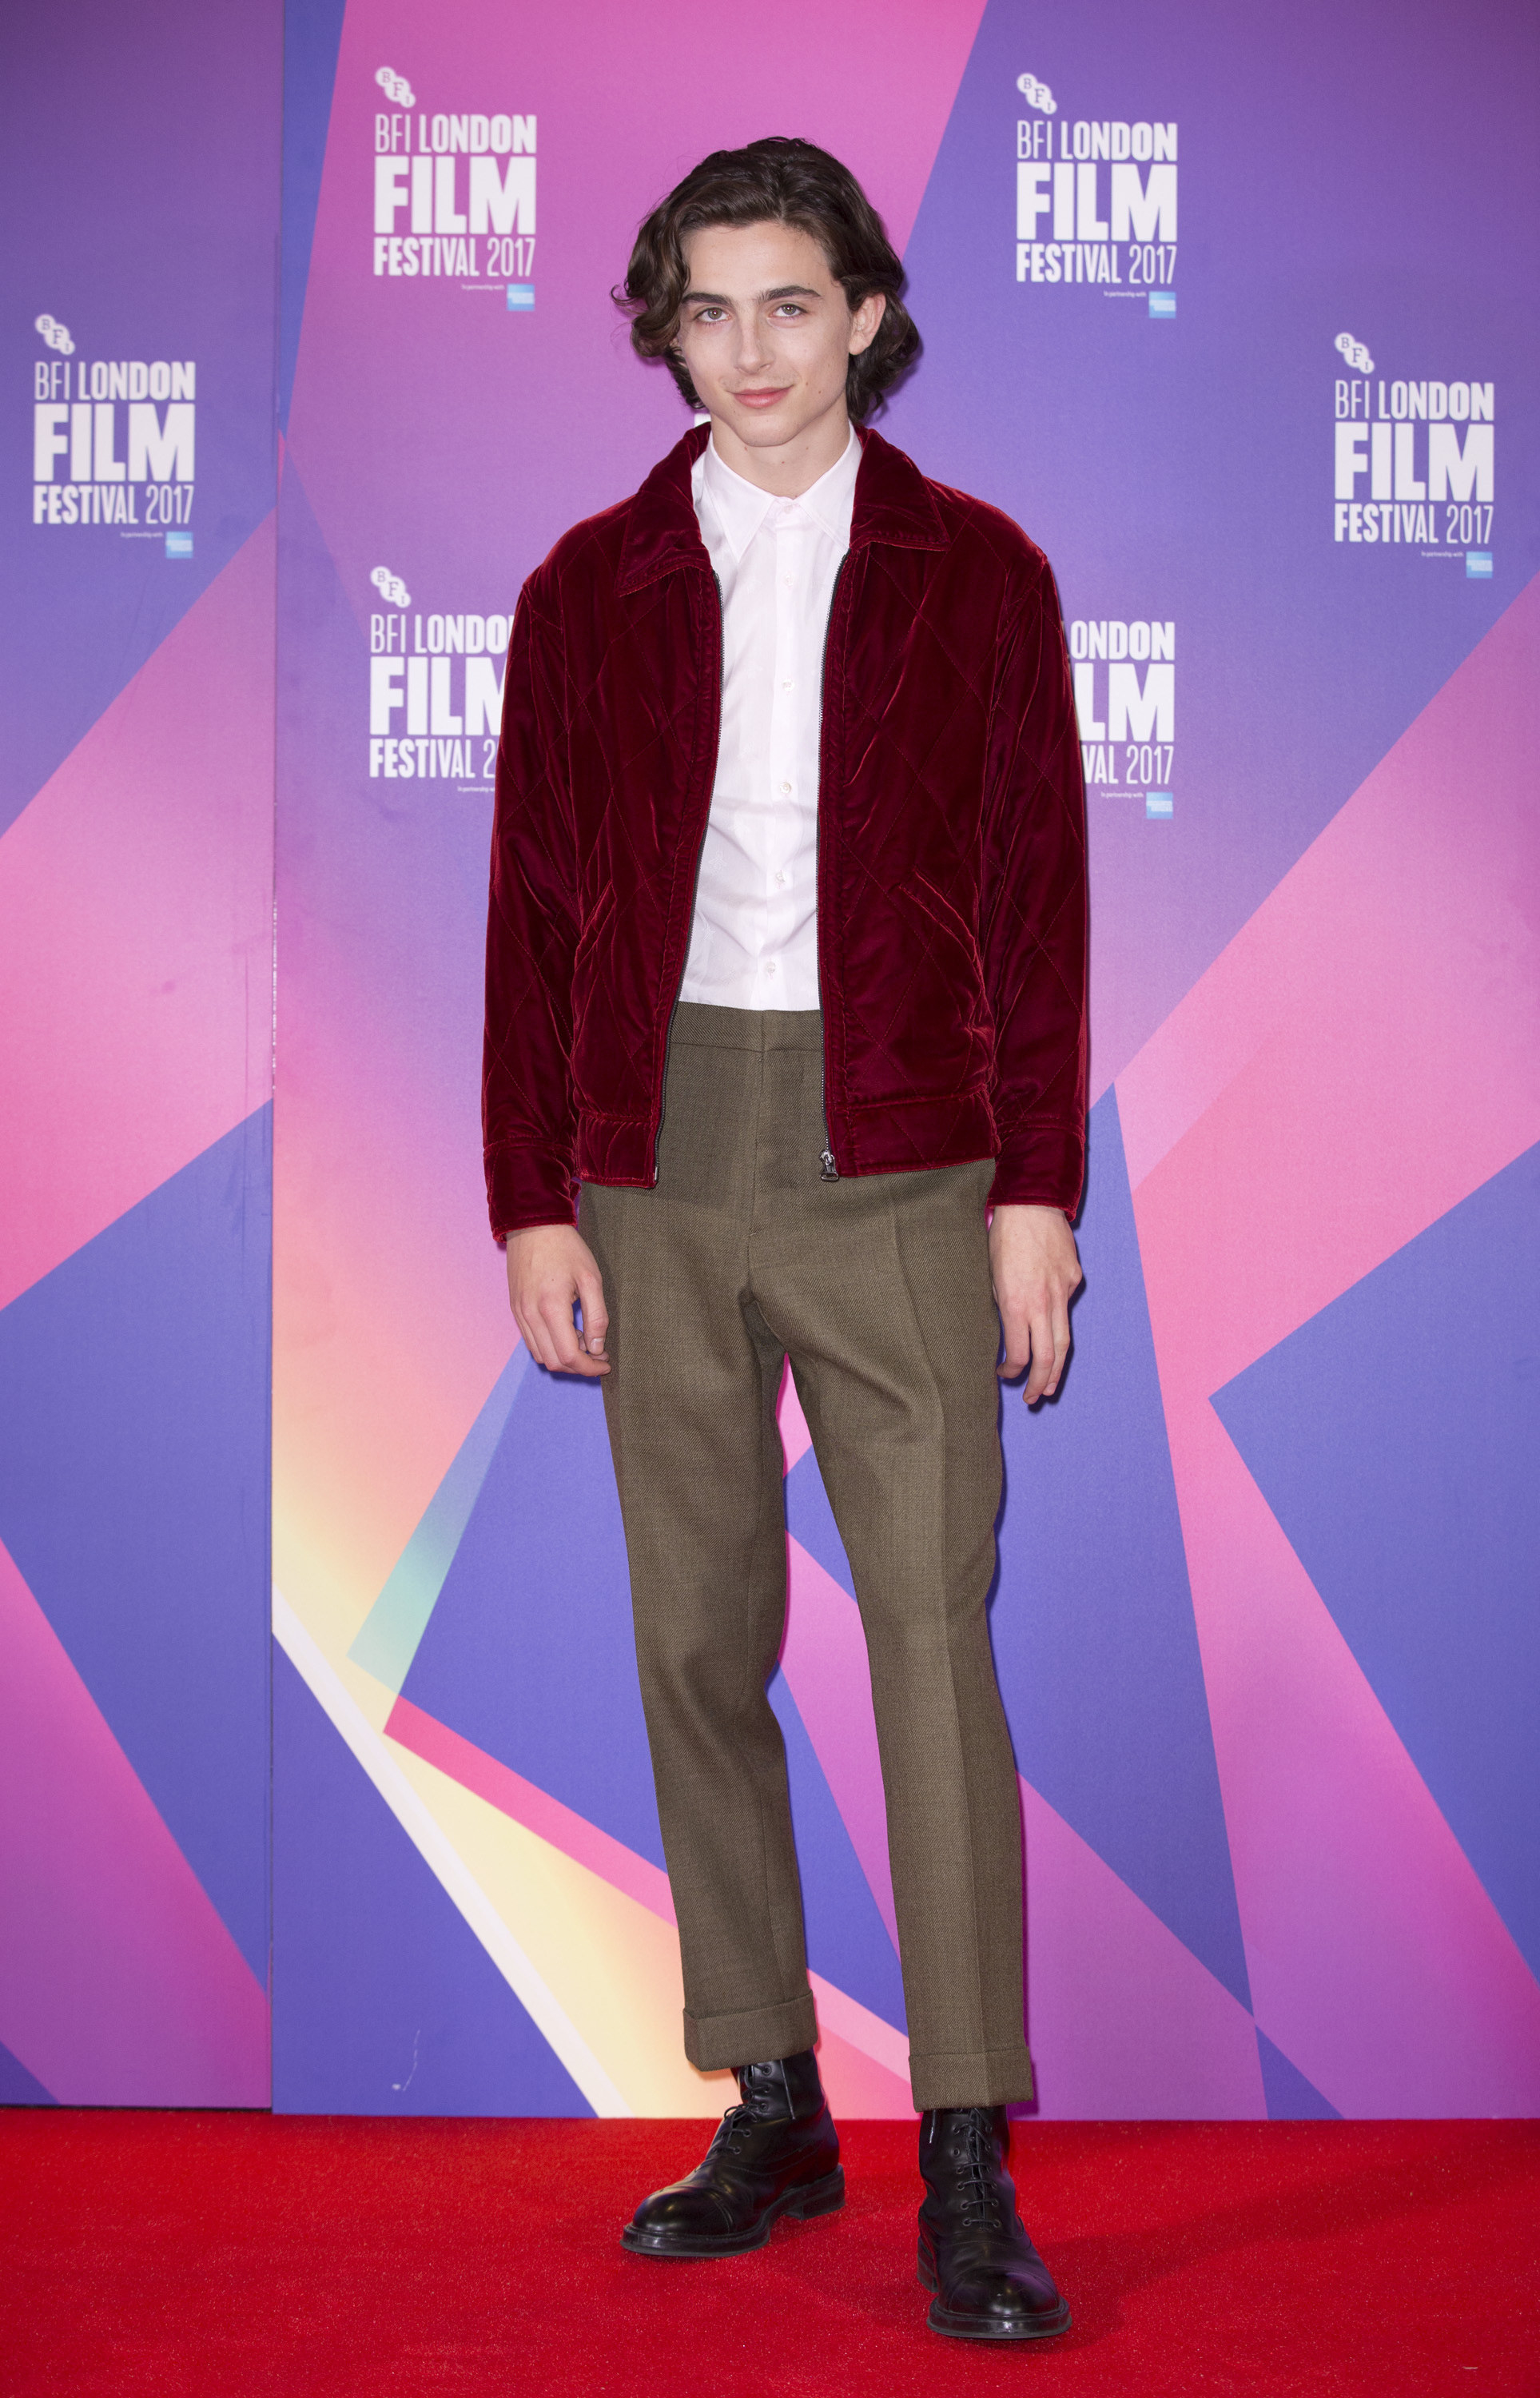 Timothée wears a maroon bomber jacket, white button down, and brown tailored pants